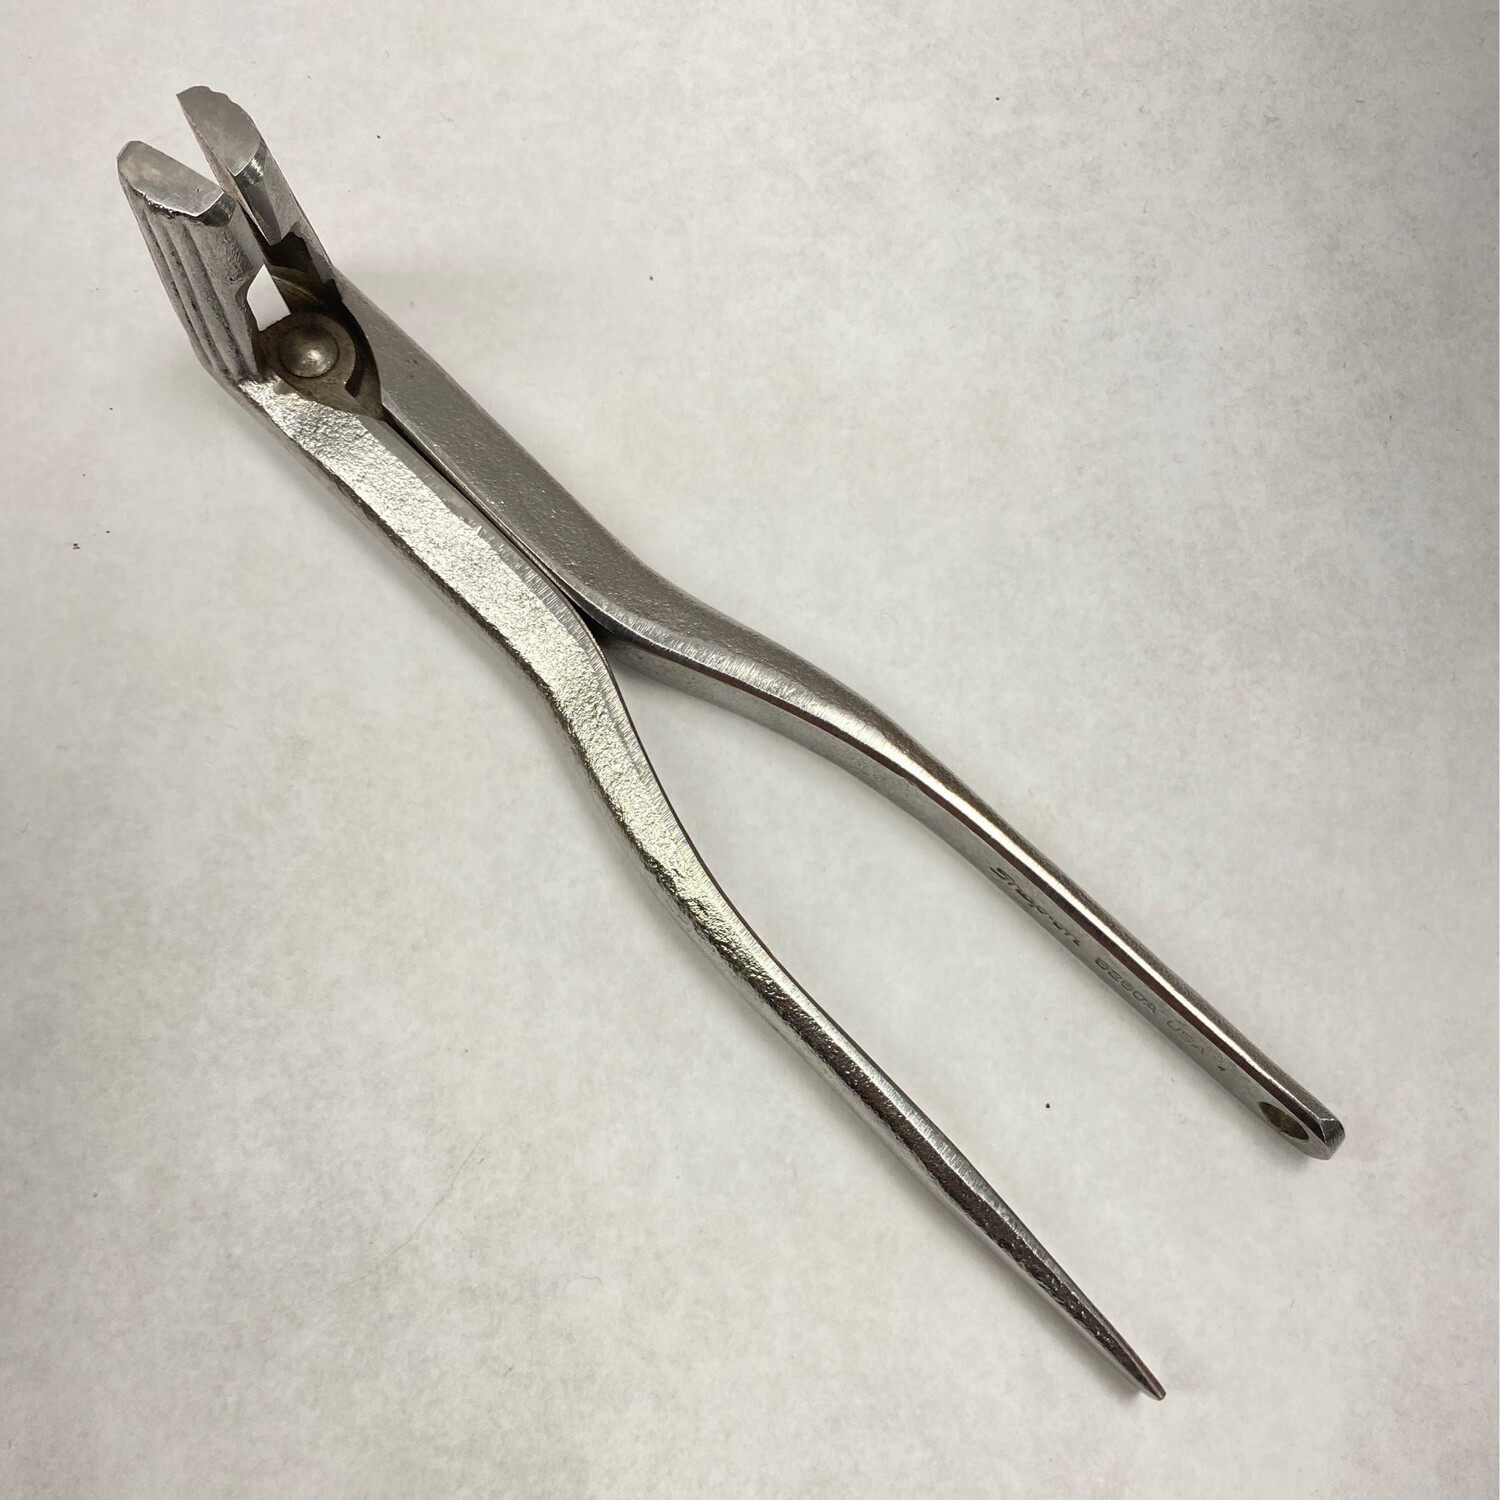 Snap On Cable Clamp Pliers, B260A